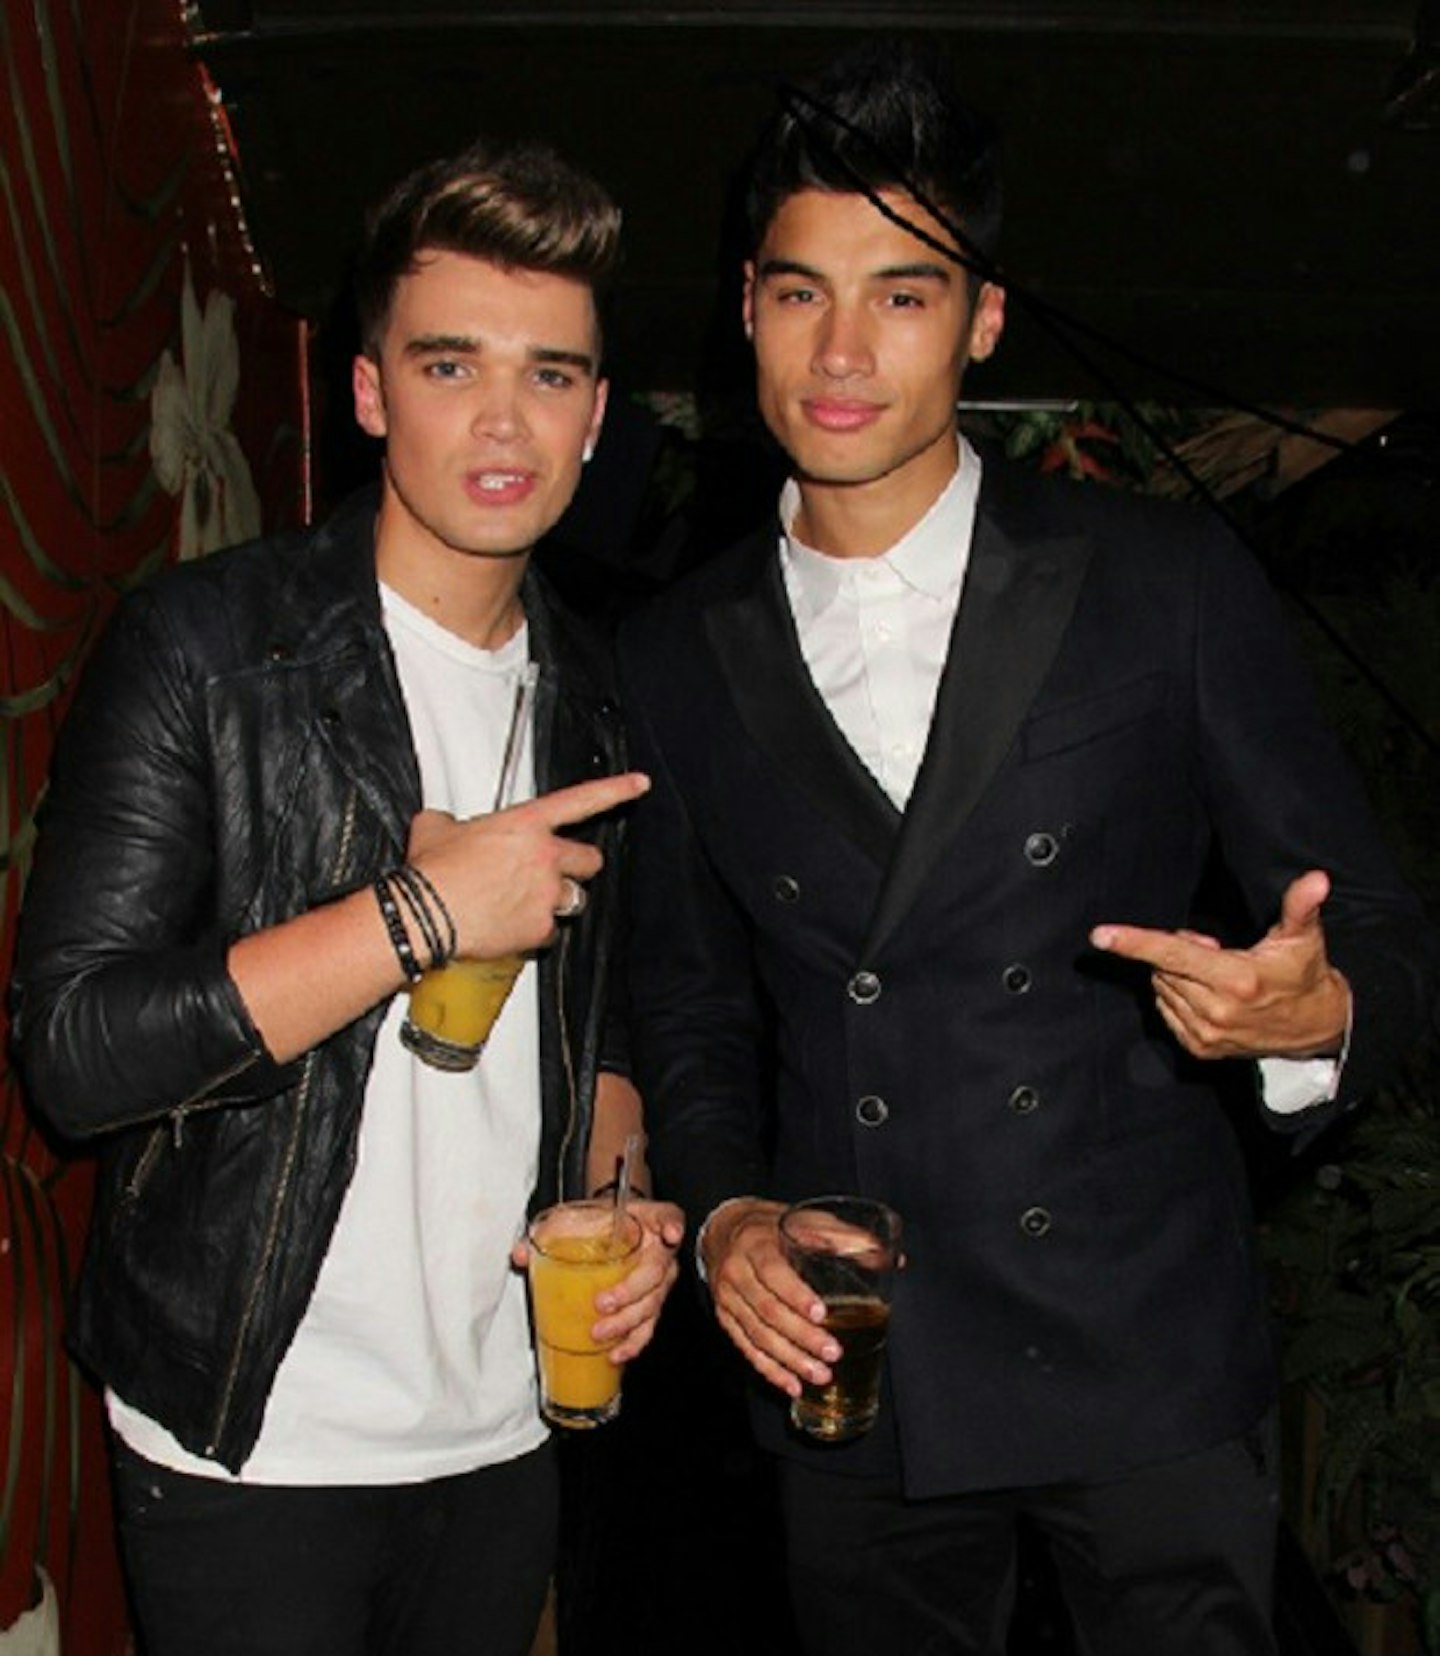 Josh from Union J and Siva from The Wanted